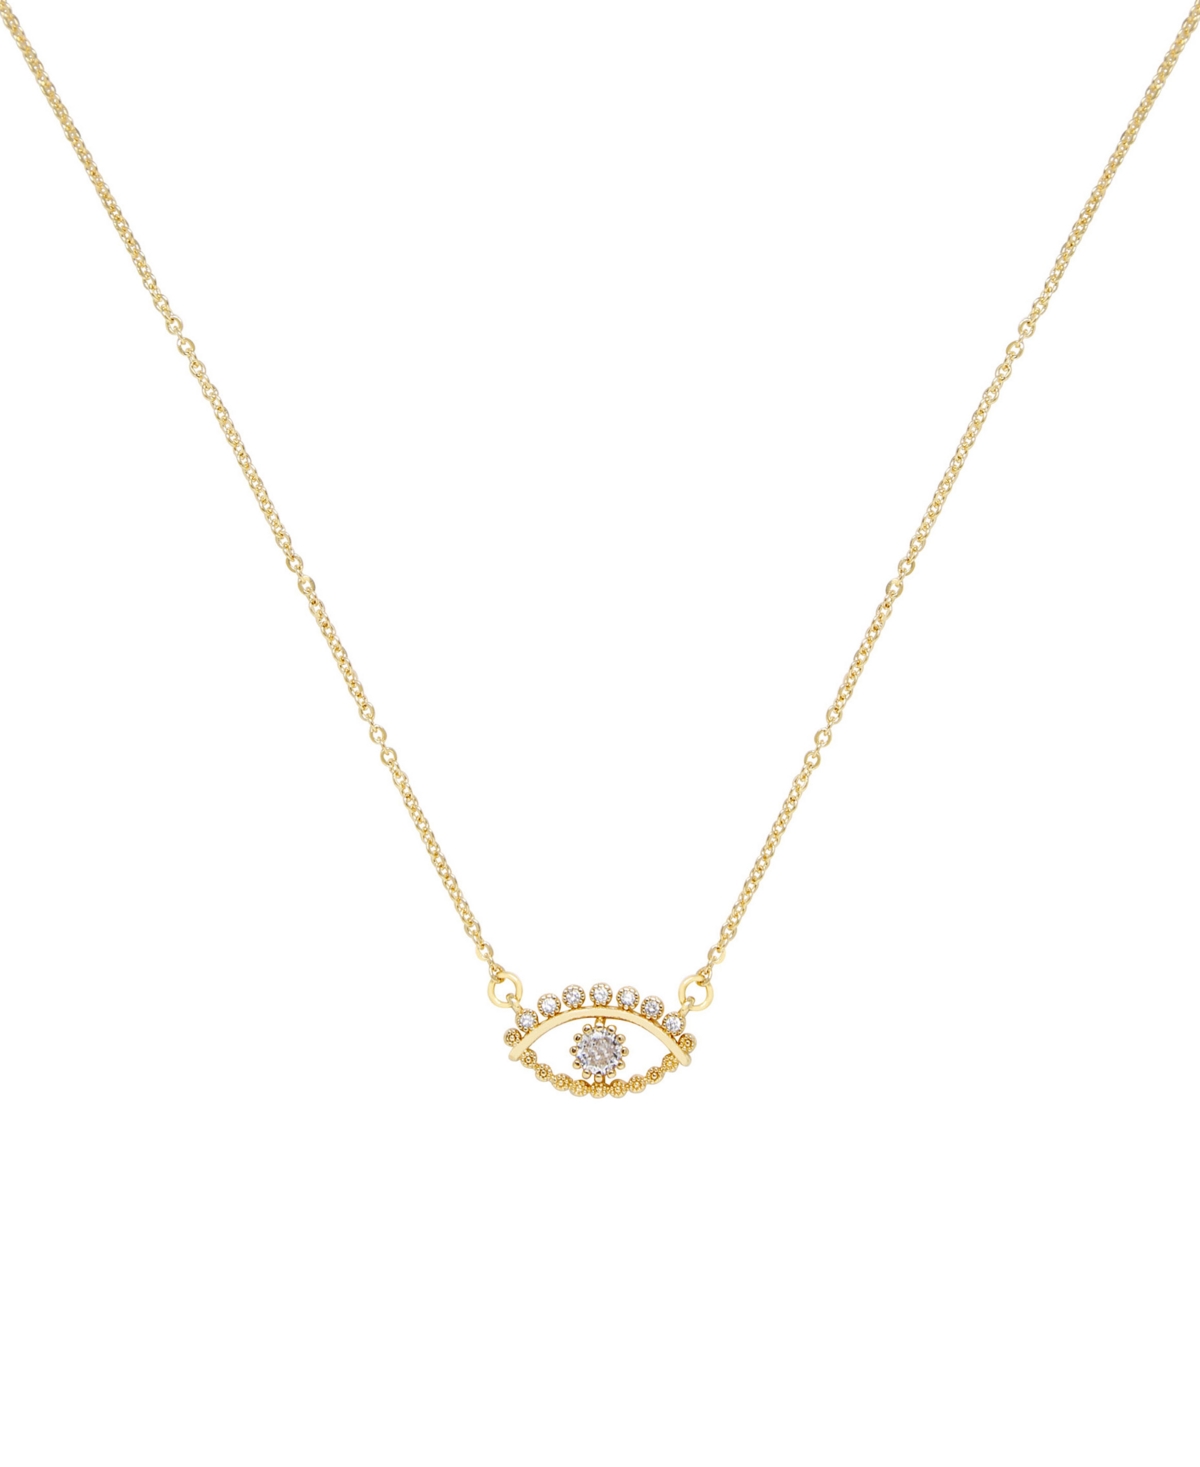 All Knowing Eye Faux Cubic Zirconia Necklace - Gold